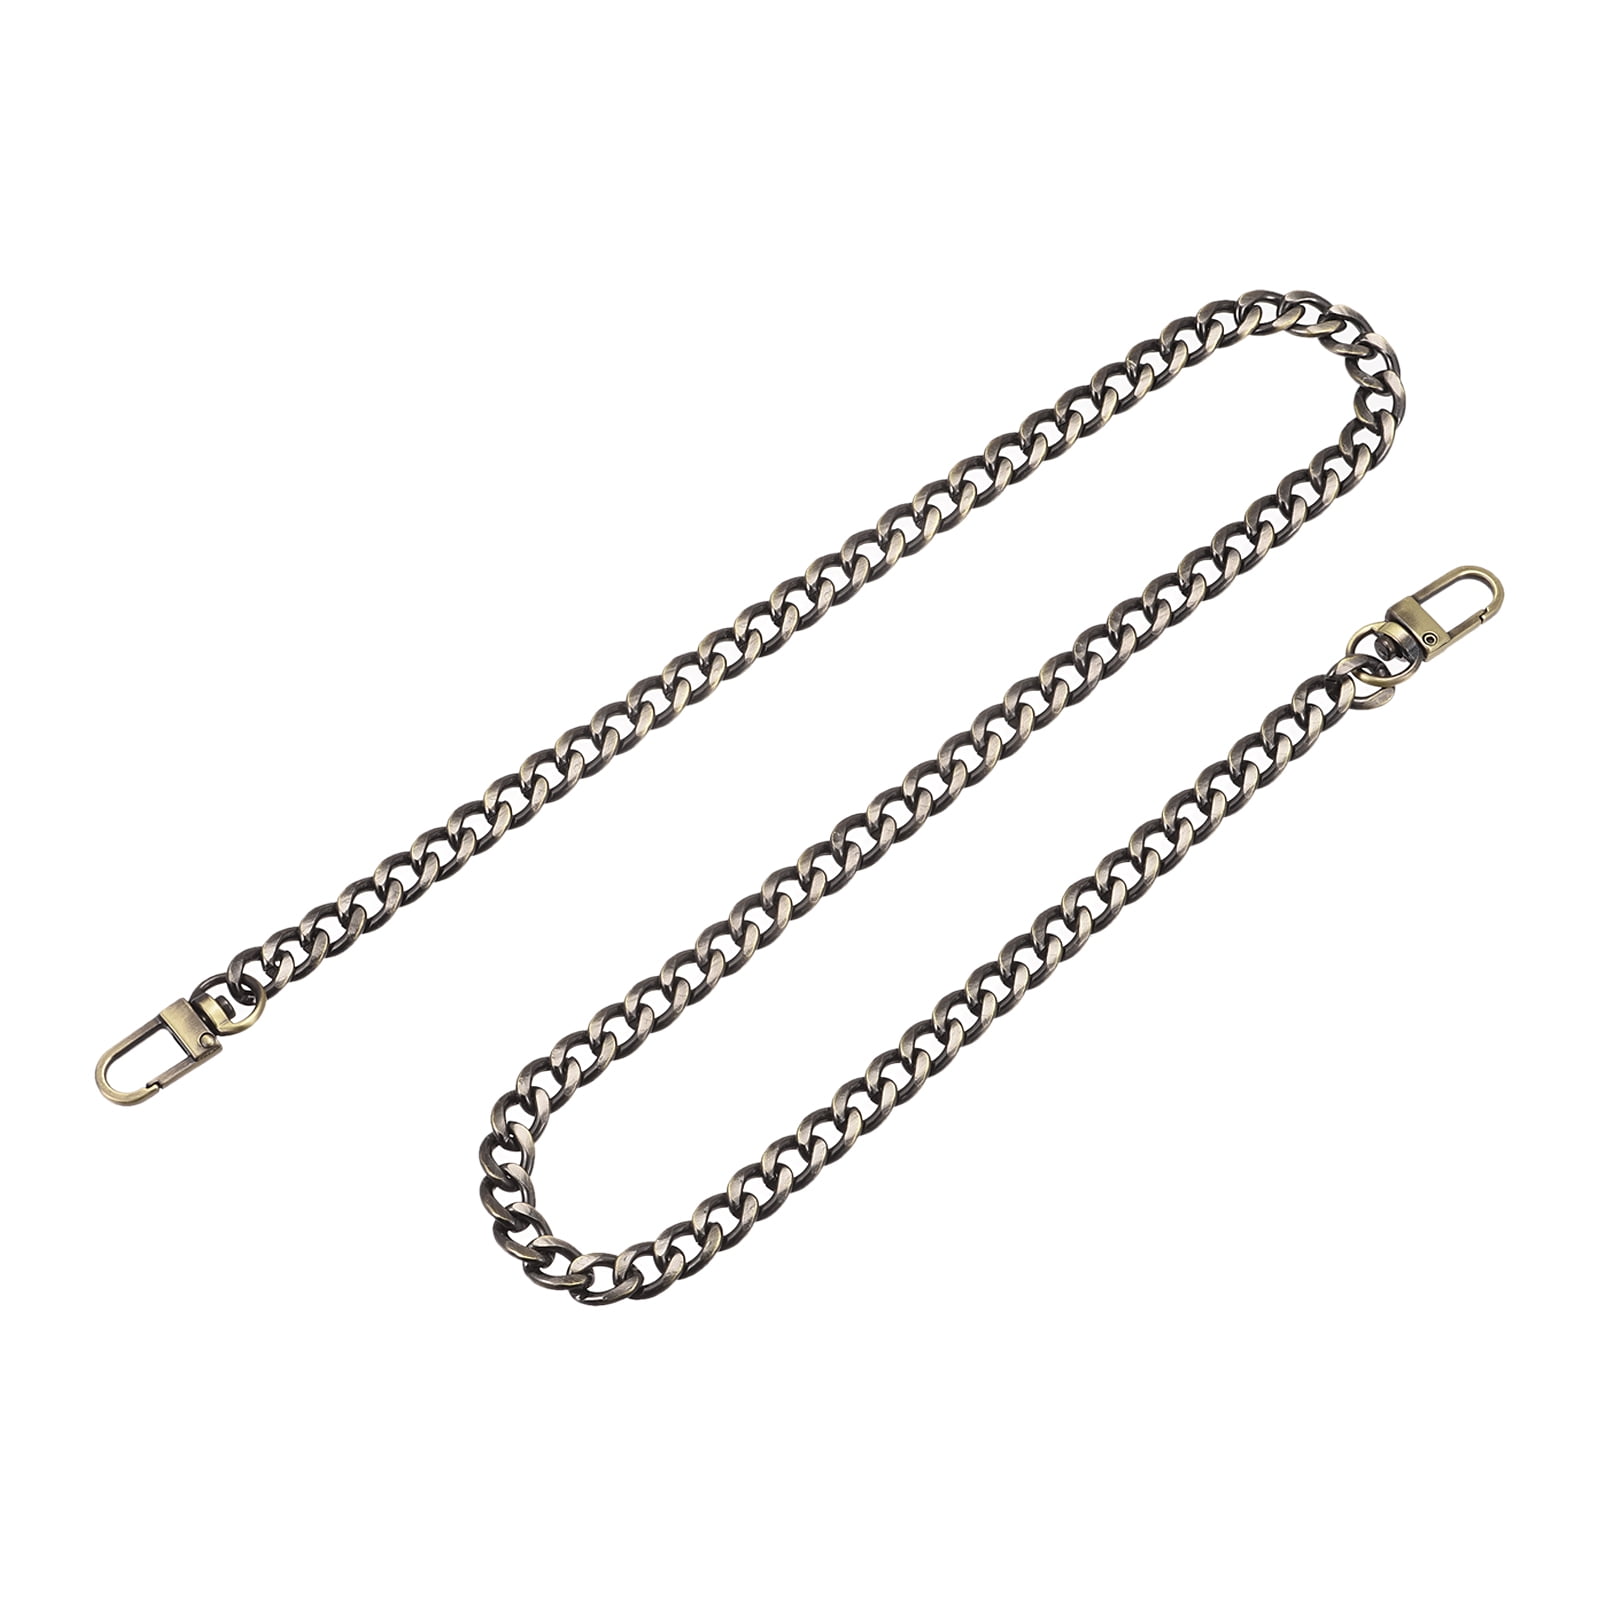  4 Pieces Silver Purse Chain Strap Metal Purse Strap Extender  Handle Bag Accessories for Replacement Flat Chain Strap with Metal Buckles  DIY Handbags Crafts, 47.2/31.5/15.7/7.9 Inches (Silver)